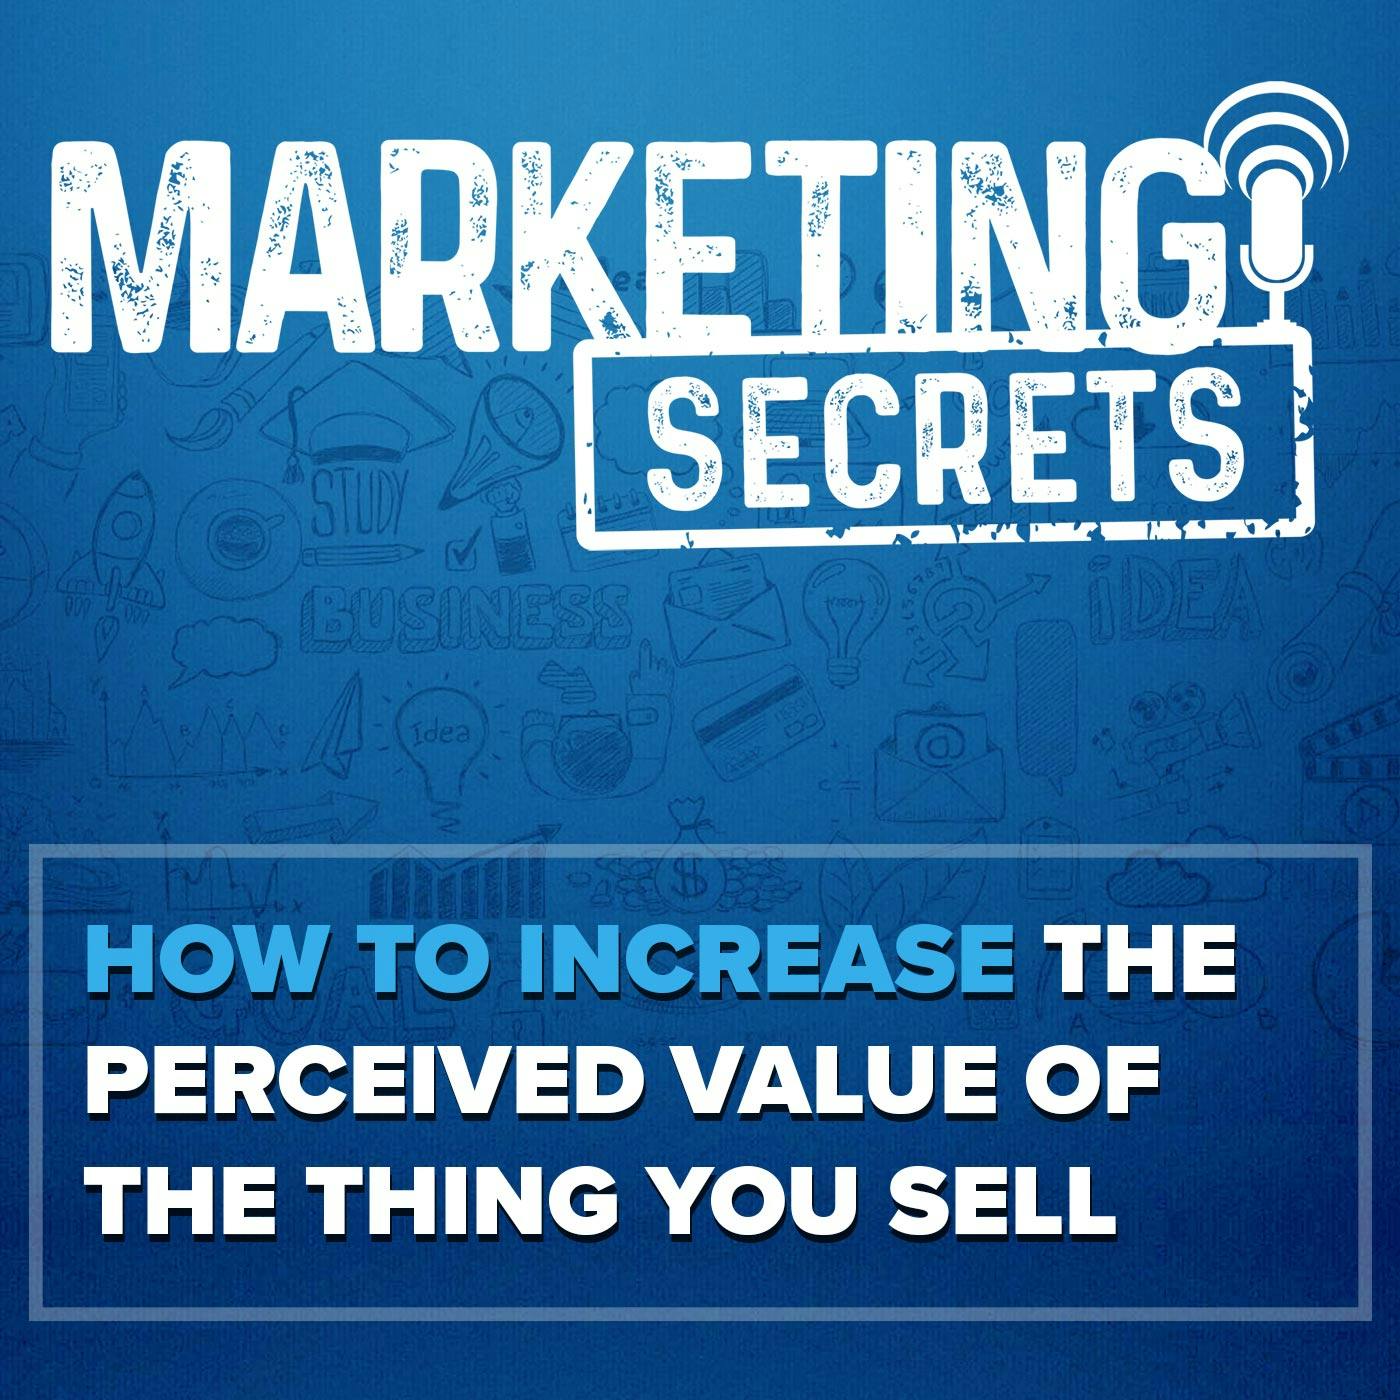 How to Increase the Perceived Value of the Thing You Sell